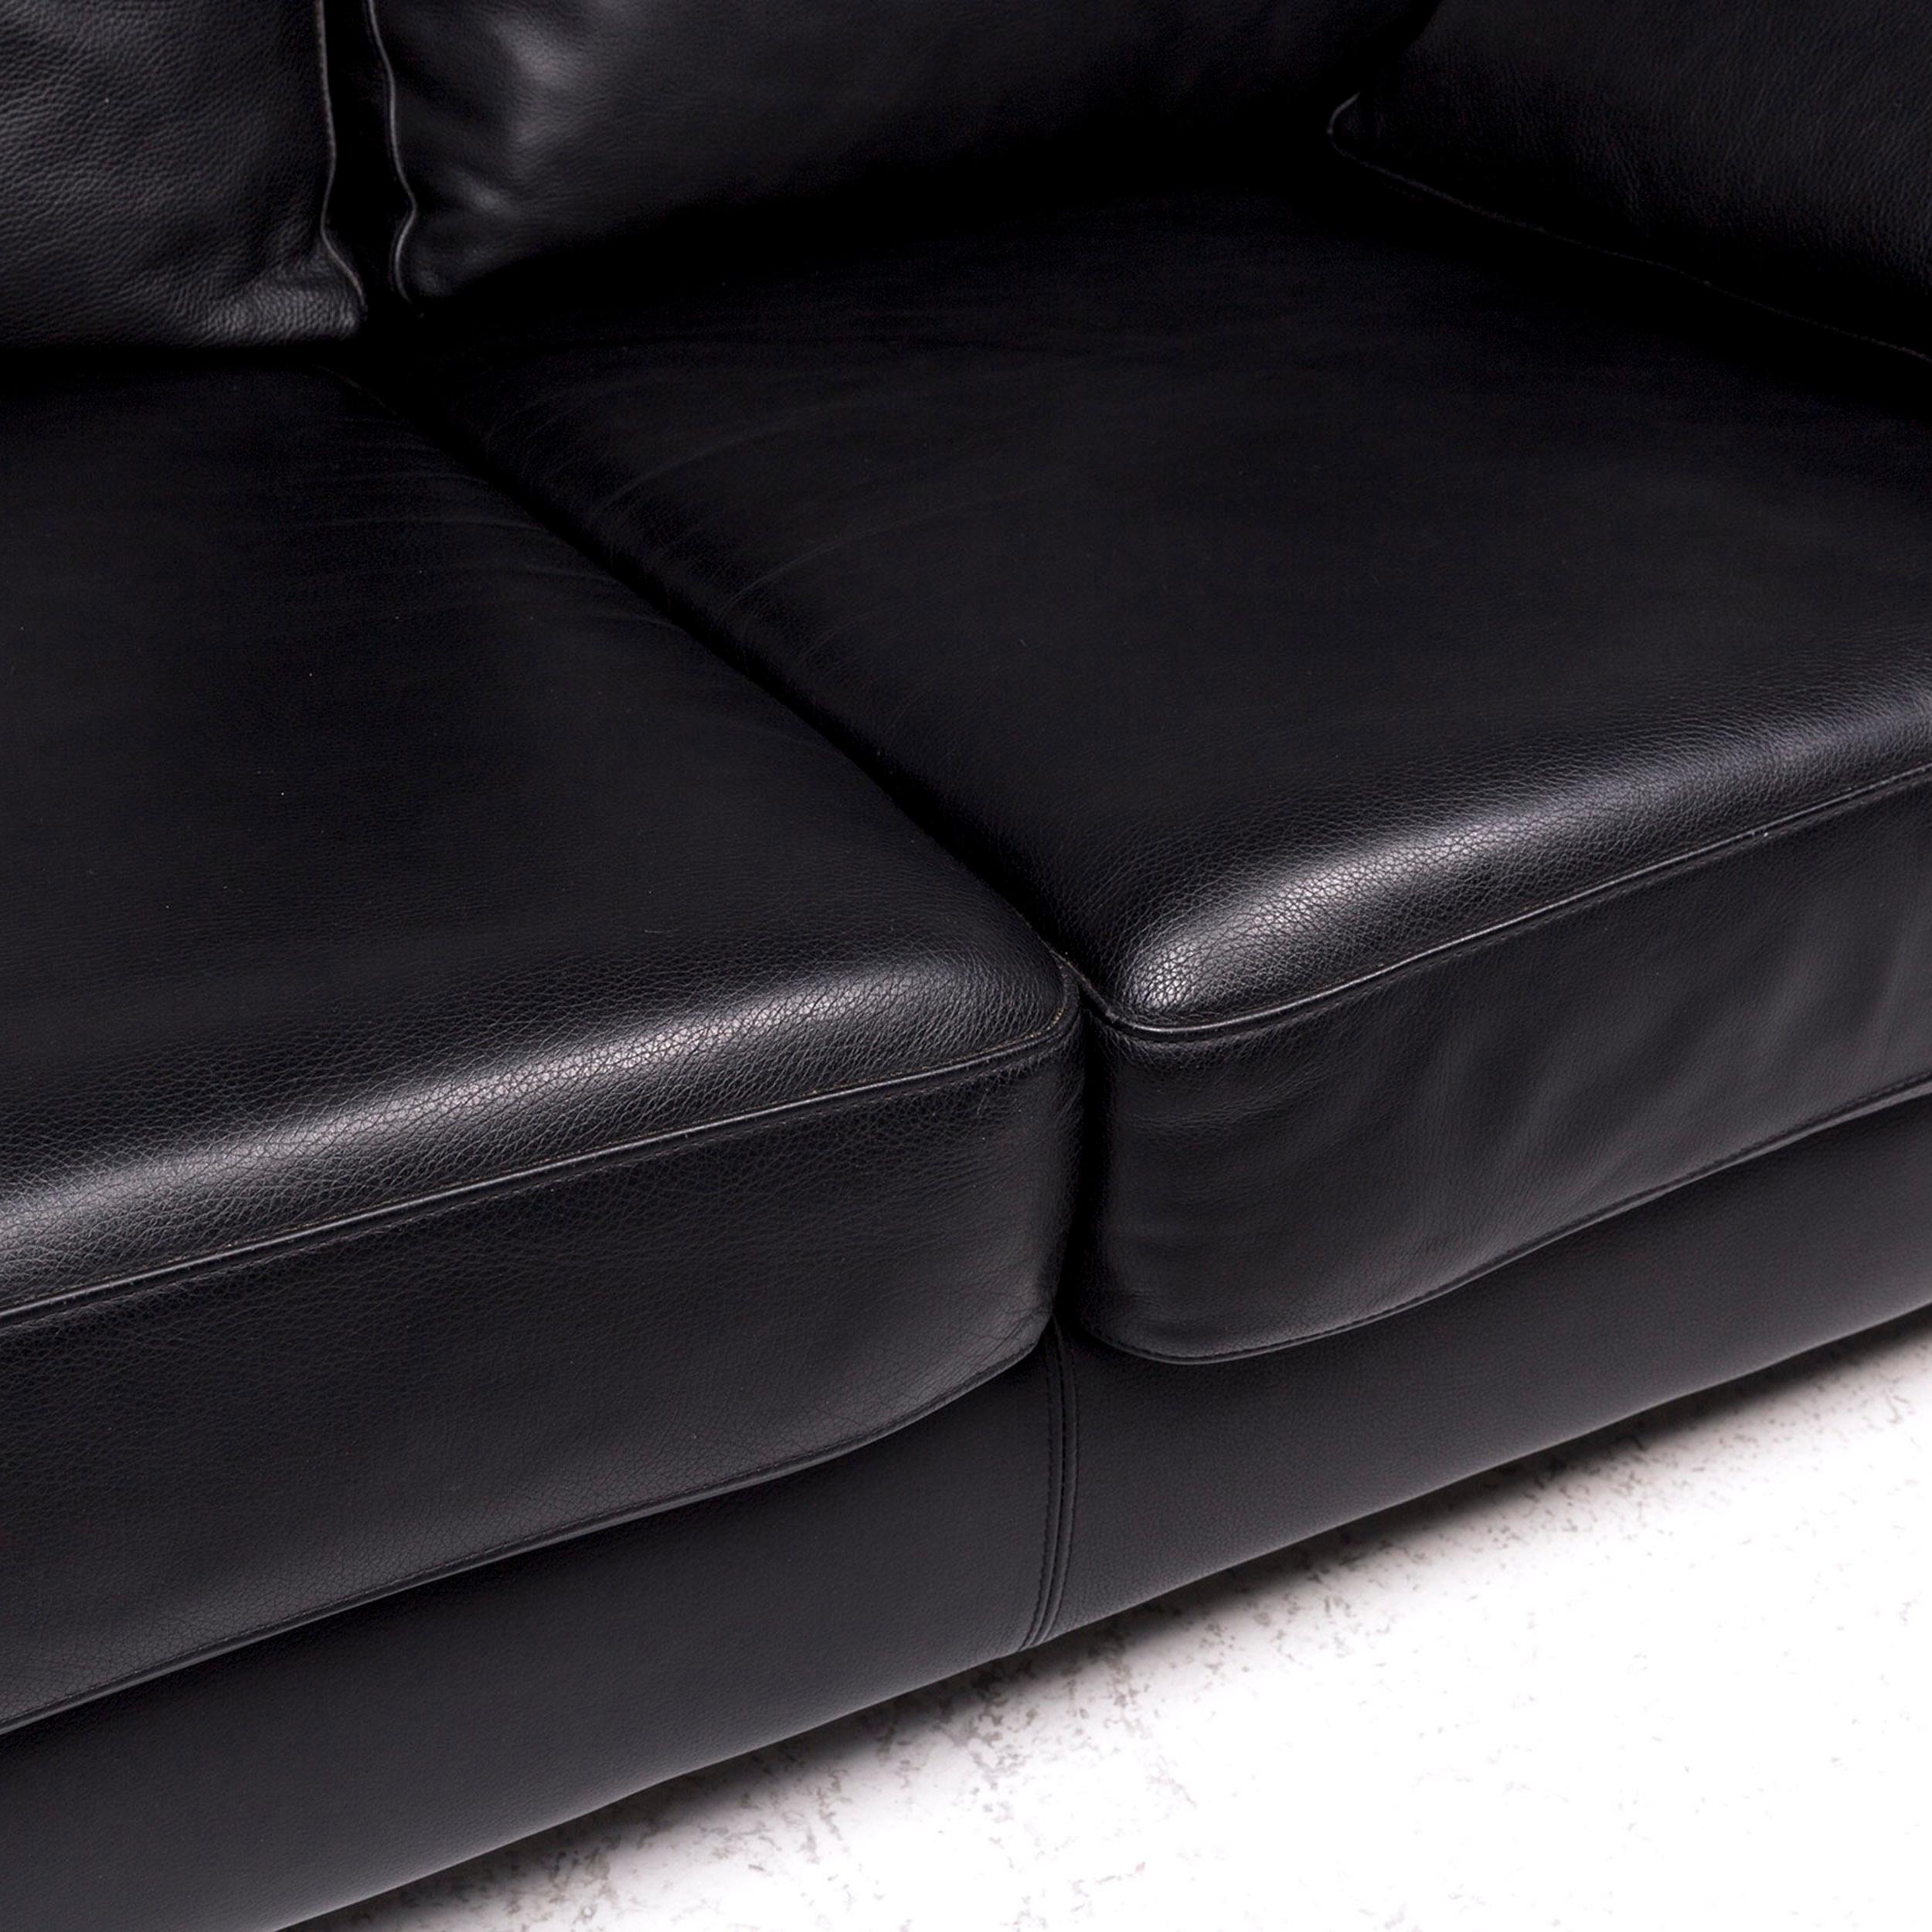 Machalke Designer Leather Sofa Black Two-Seat Couch In Good Condition For Sale In Cologne, DE